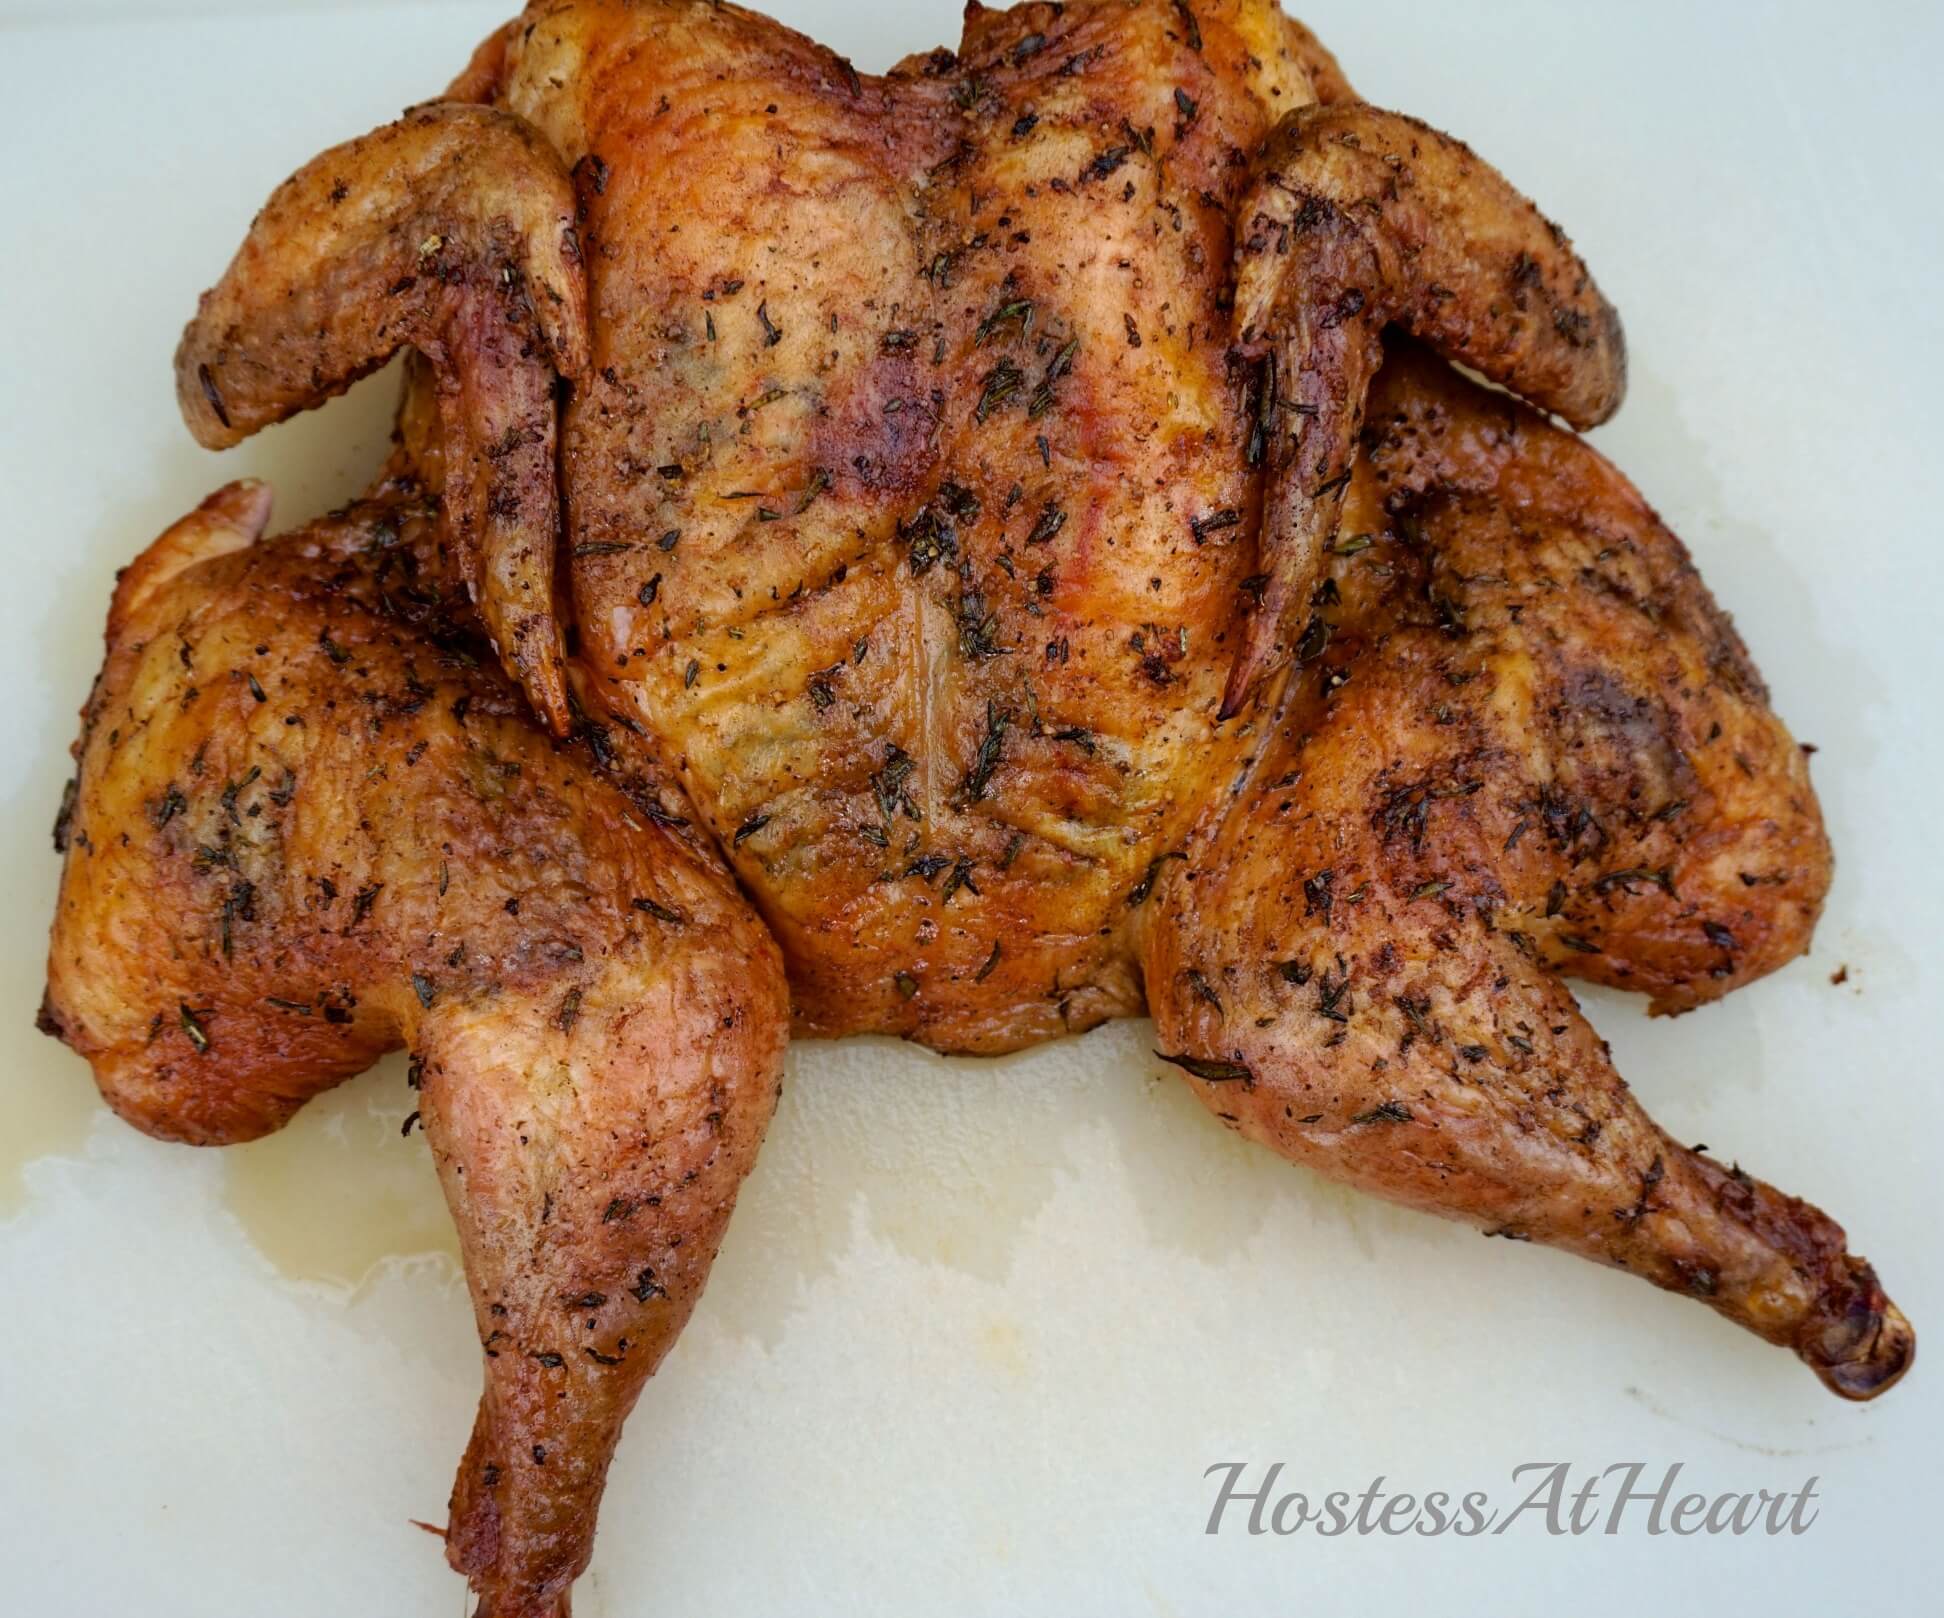 A roasted spatchcocked chicken.